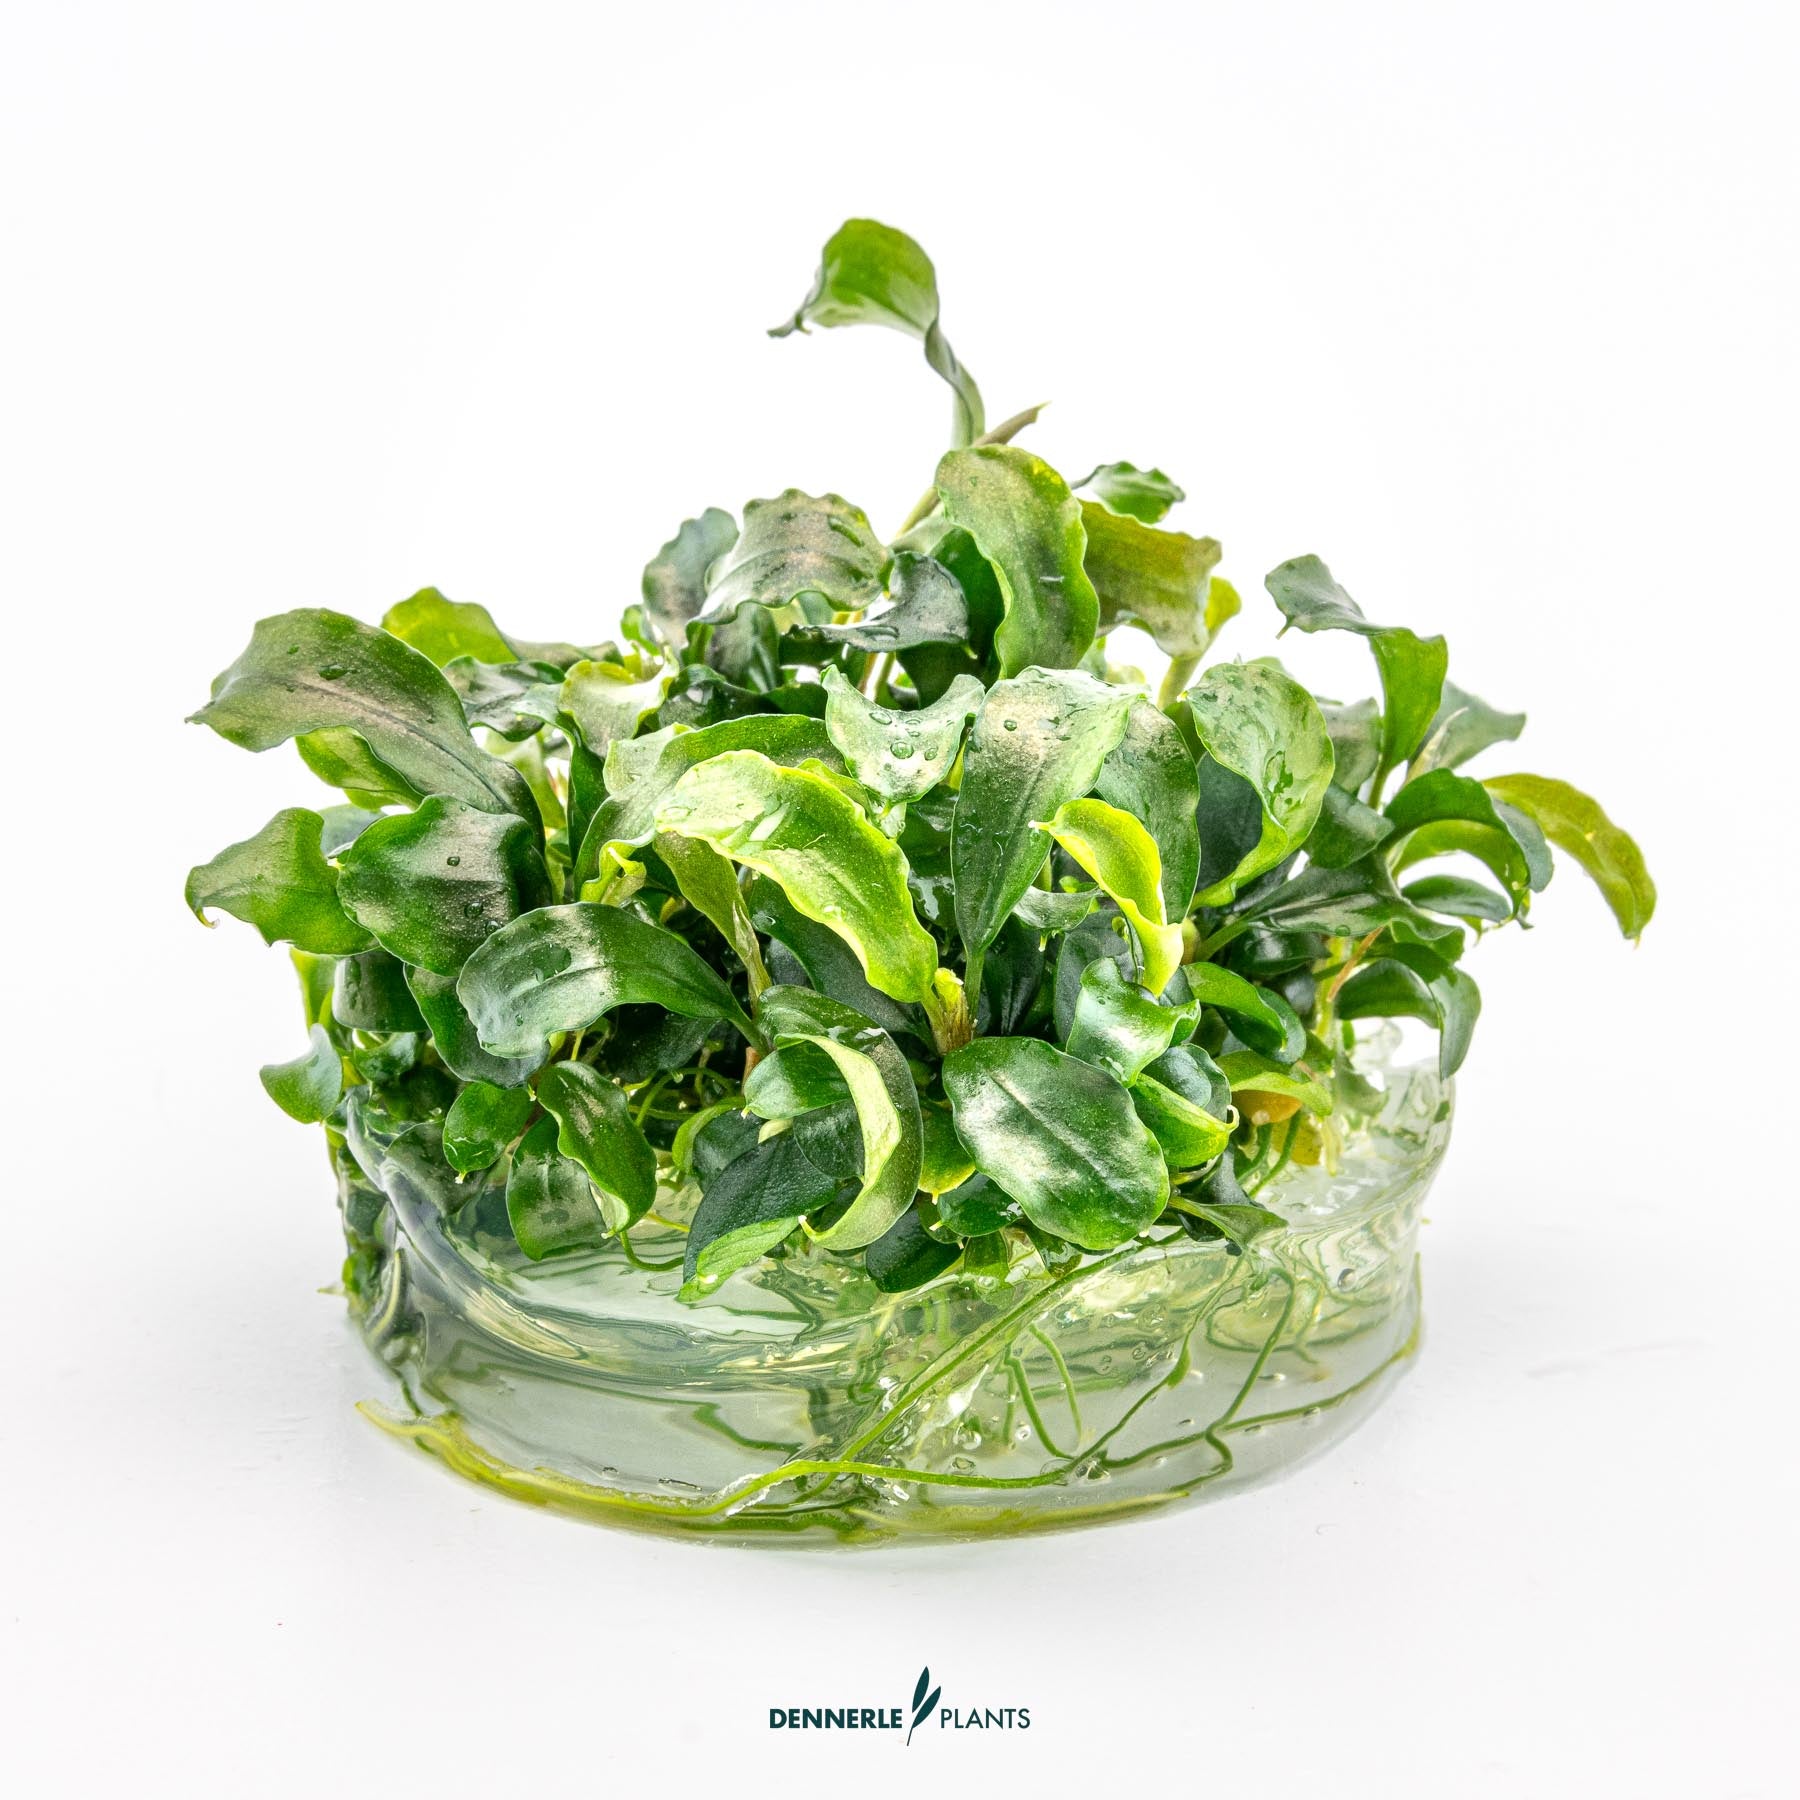 Product picture of bucephalandra 'Bukit Kelam' out of the cup